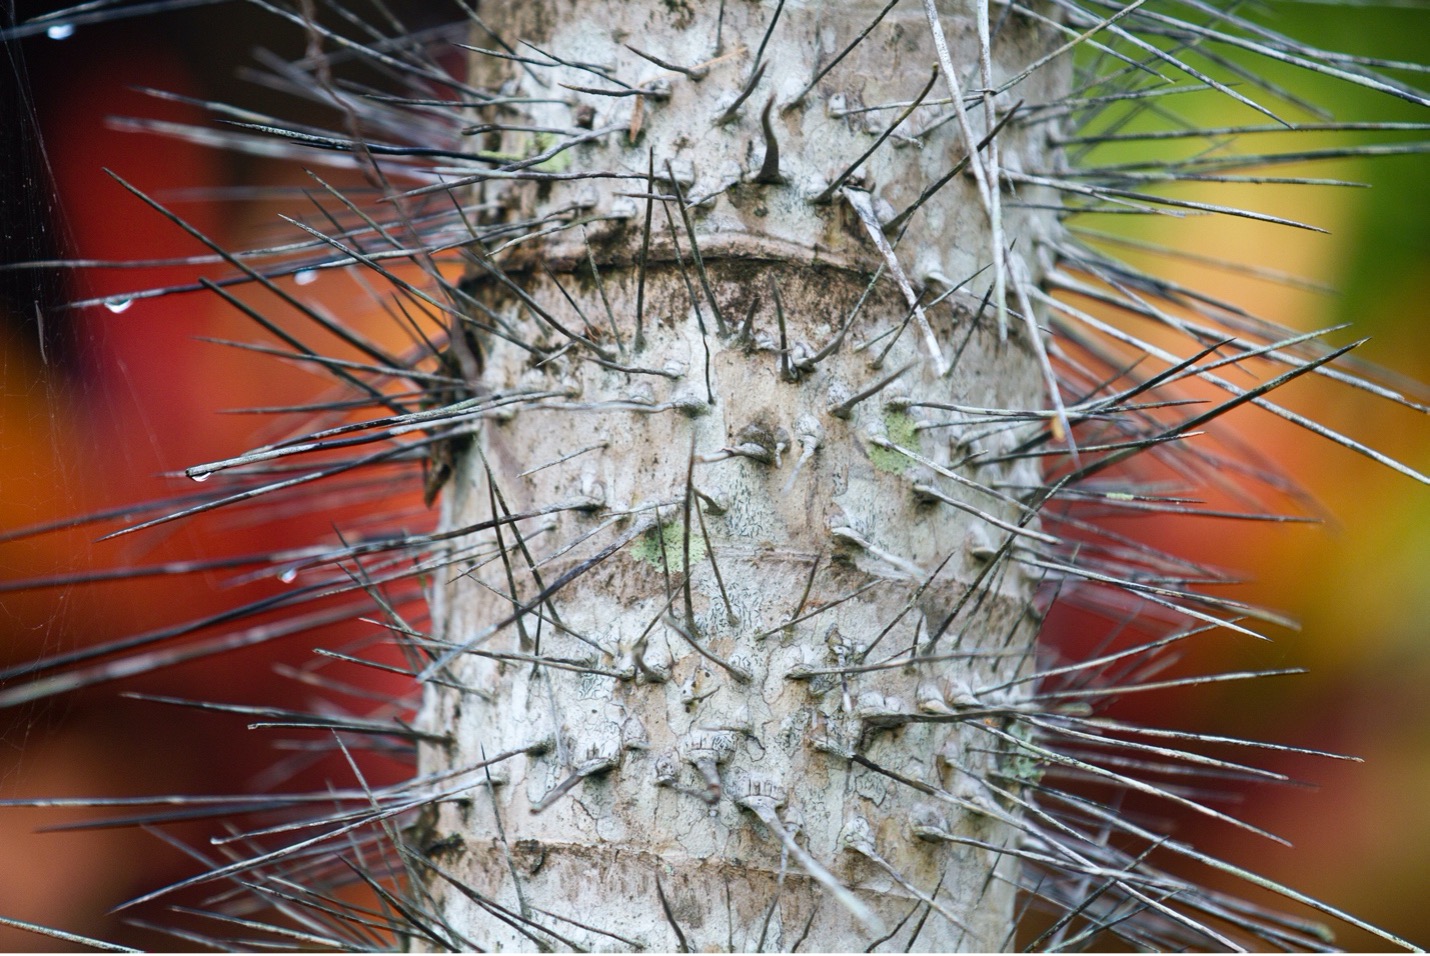 a tree trunk exhibits many long spikes